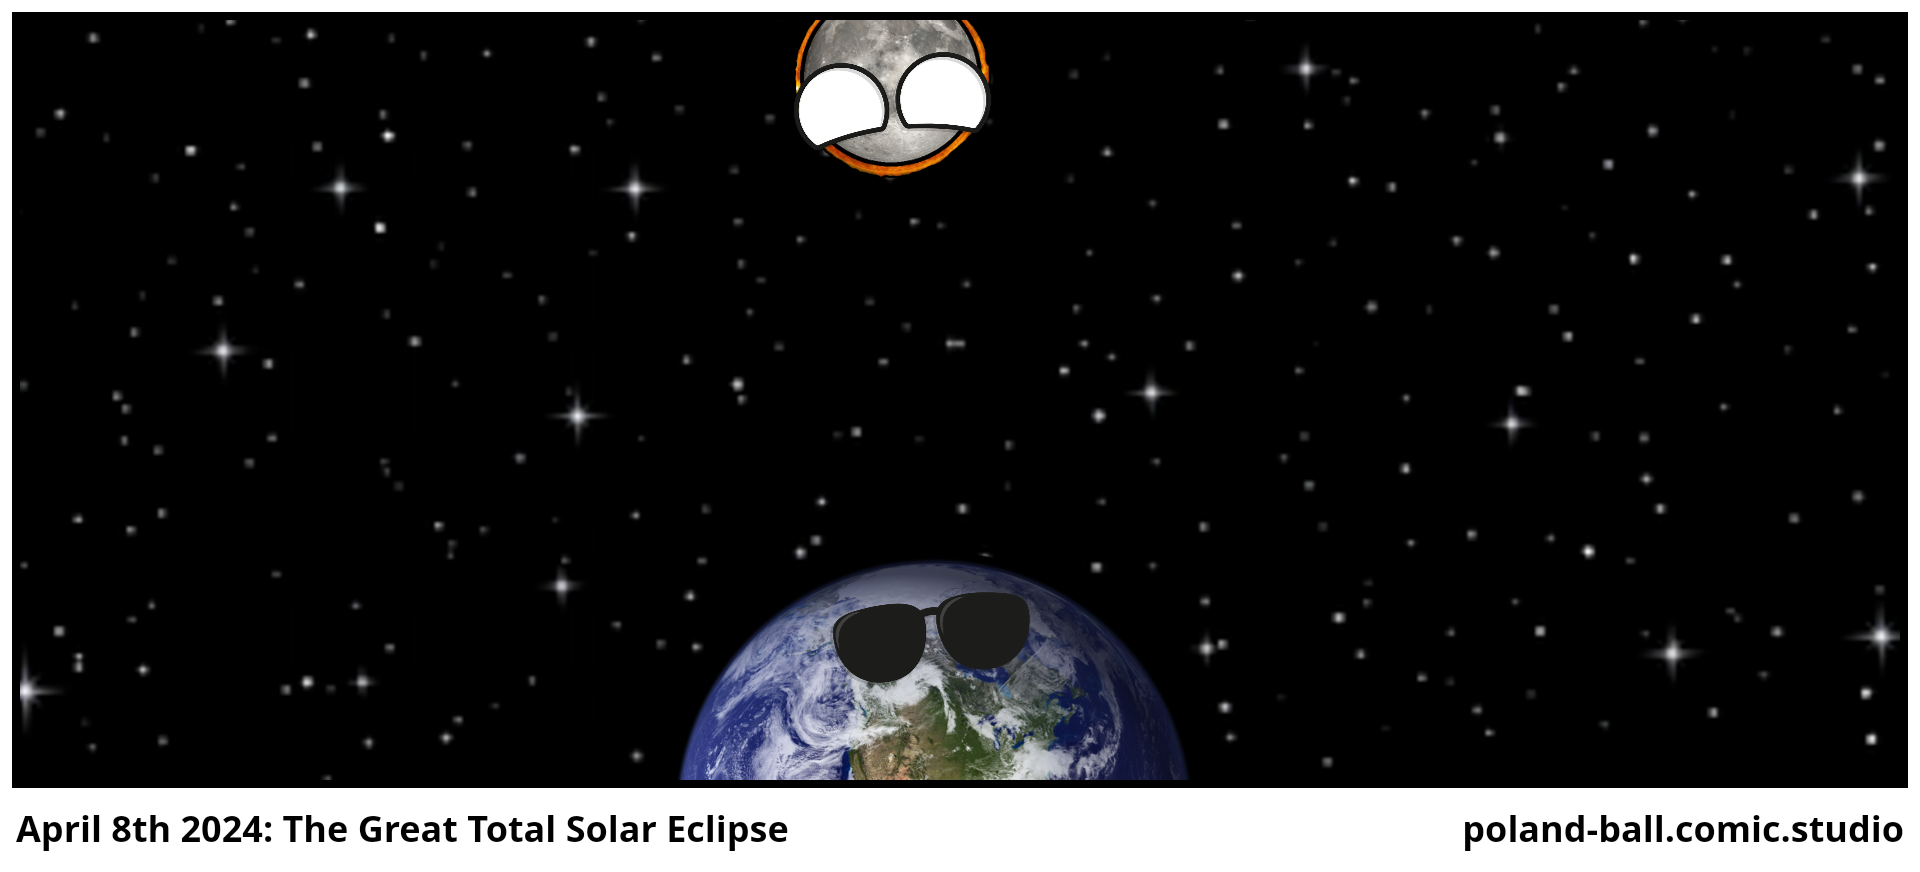 April 8th 2024: The Great Total Solar Eclipse